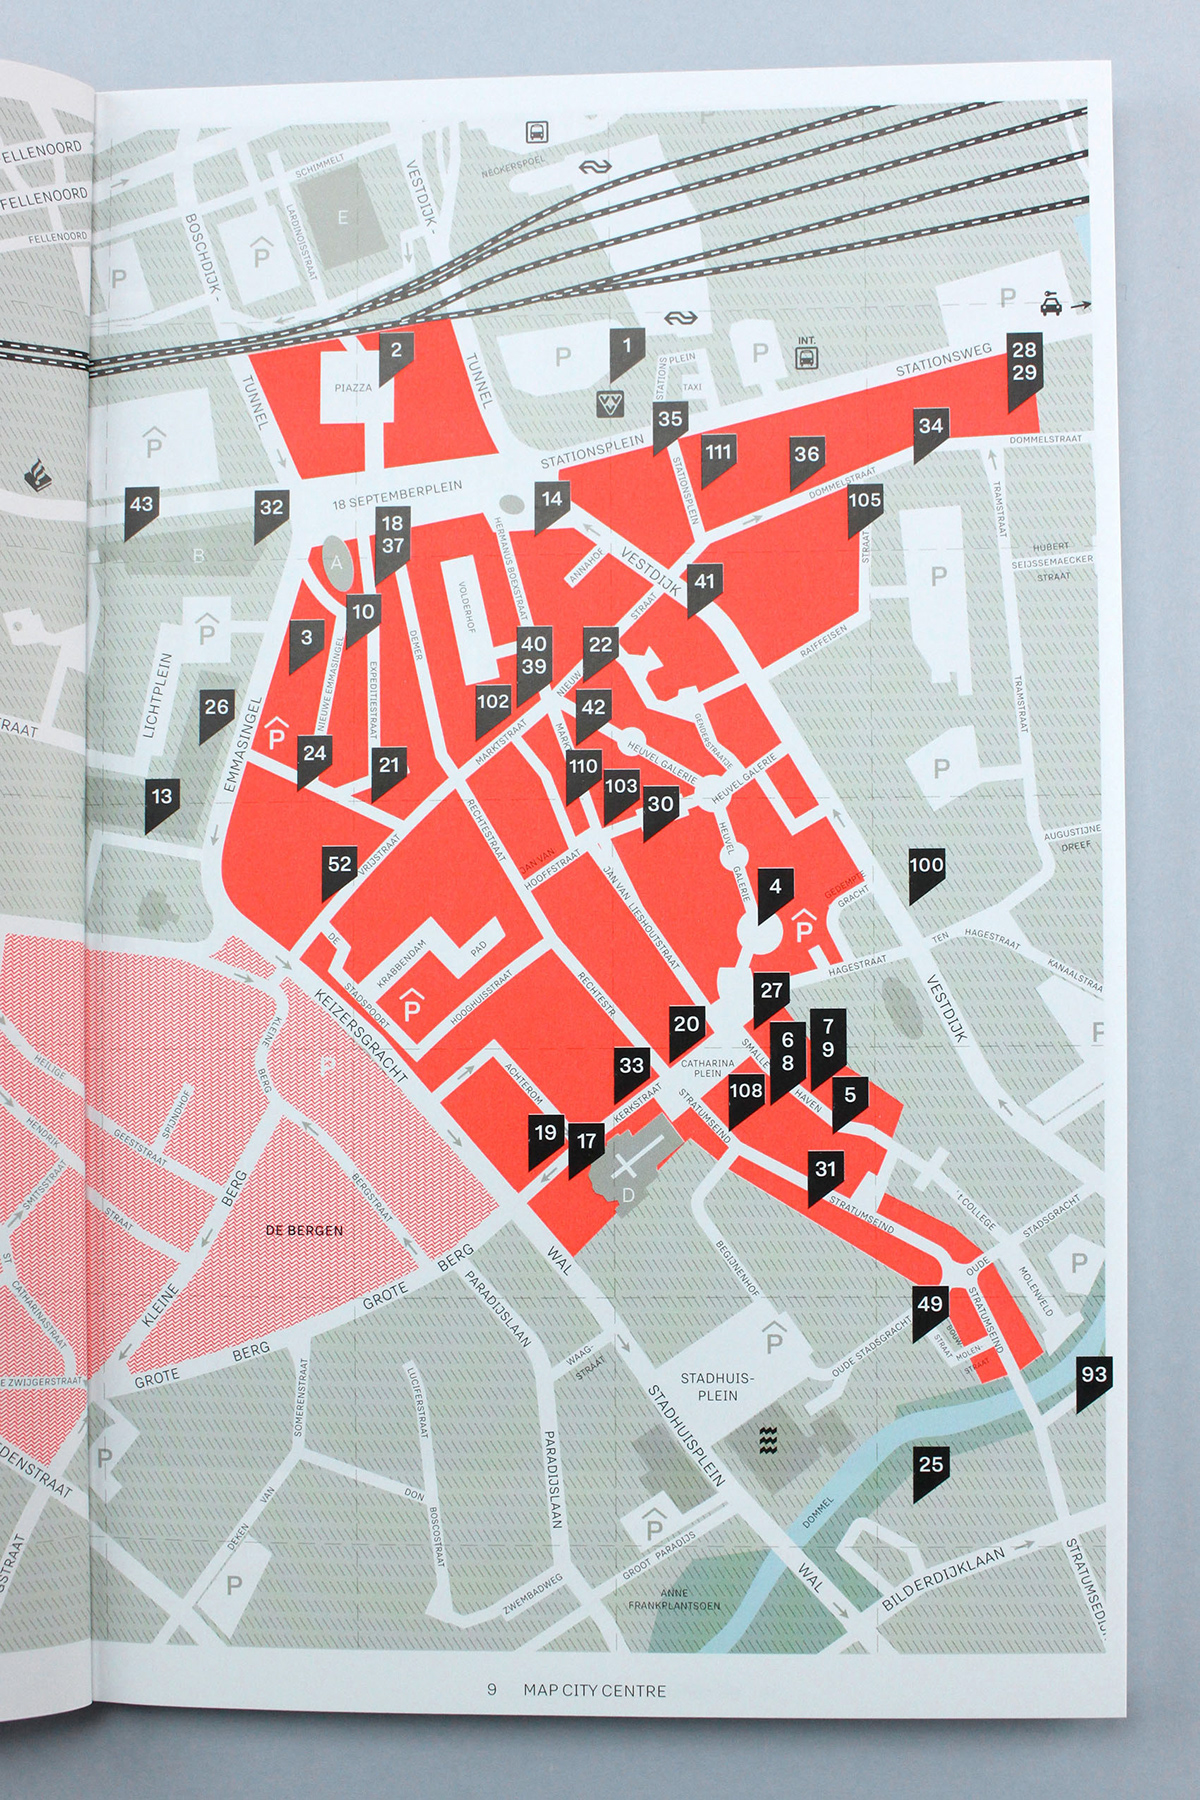 City Guide eindhoven maps